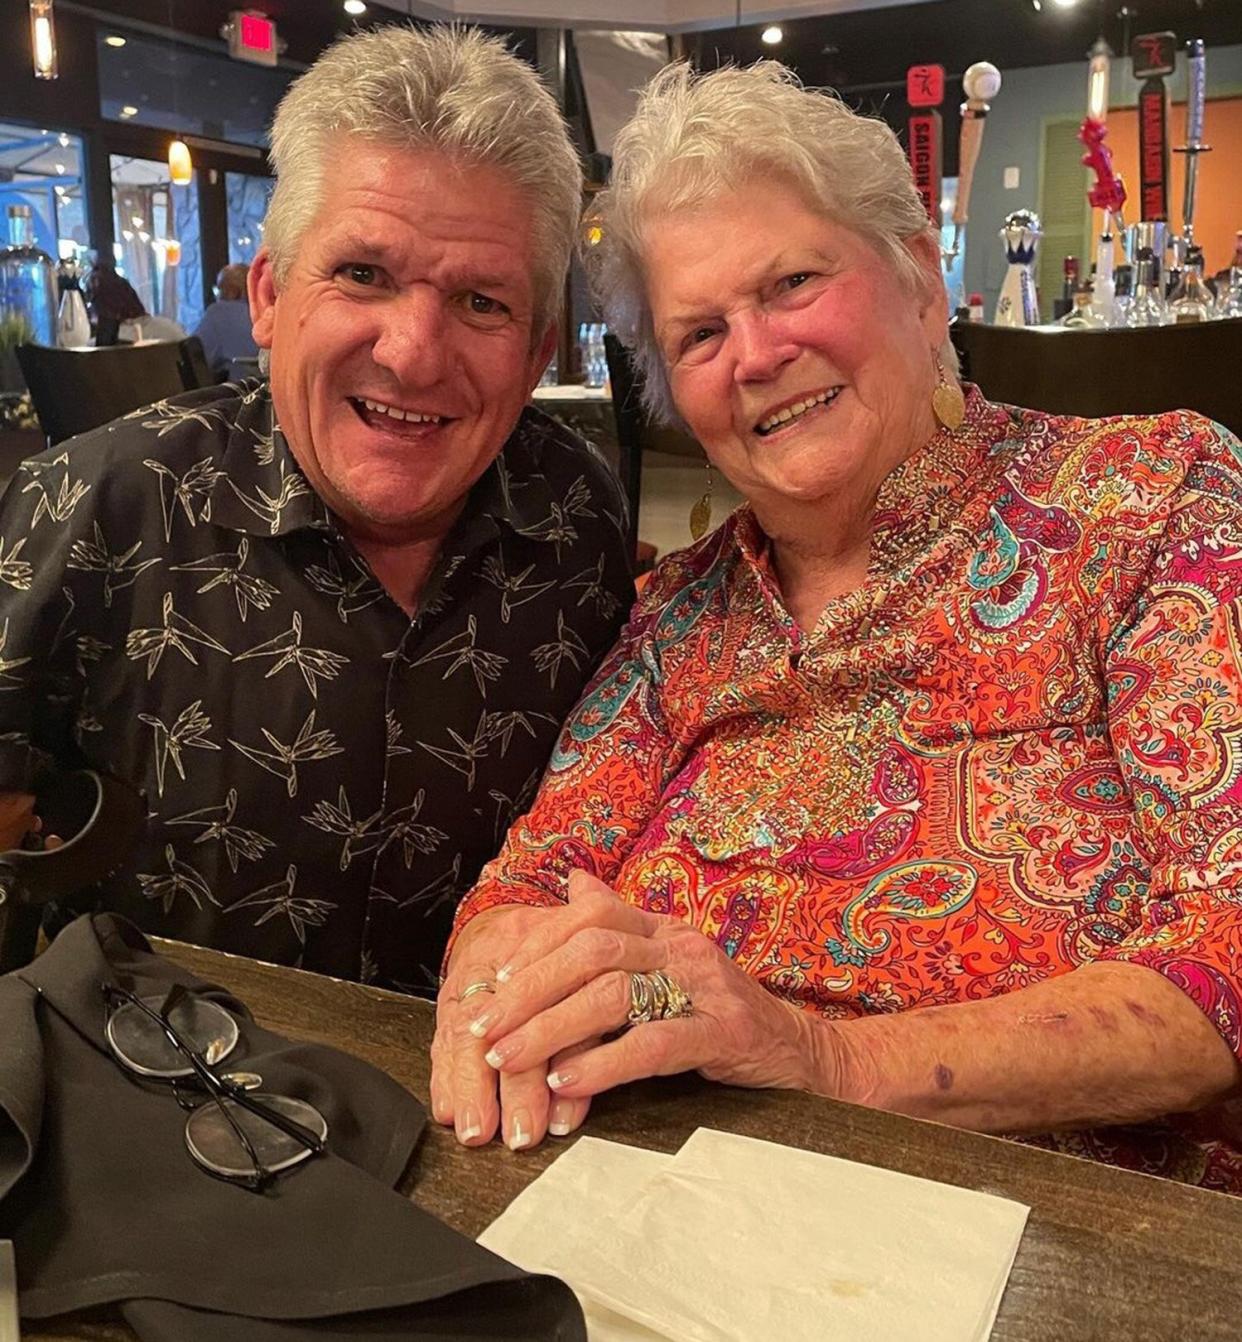 LPBW's Matt Roloff Shares How He's Helping His Mom 'Through This Transitional Time' After His Dad's Death